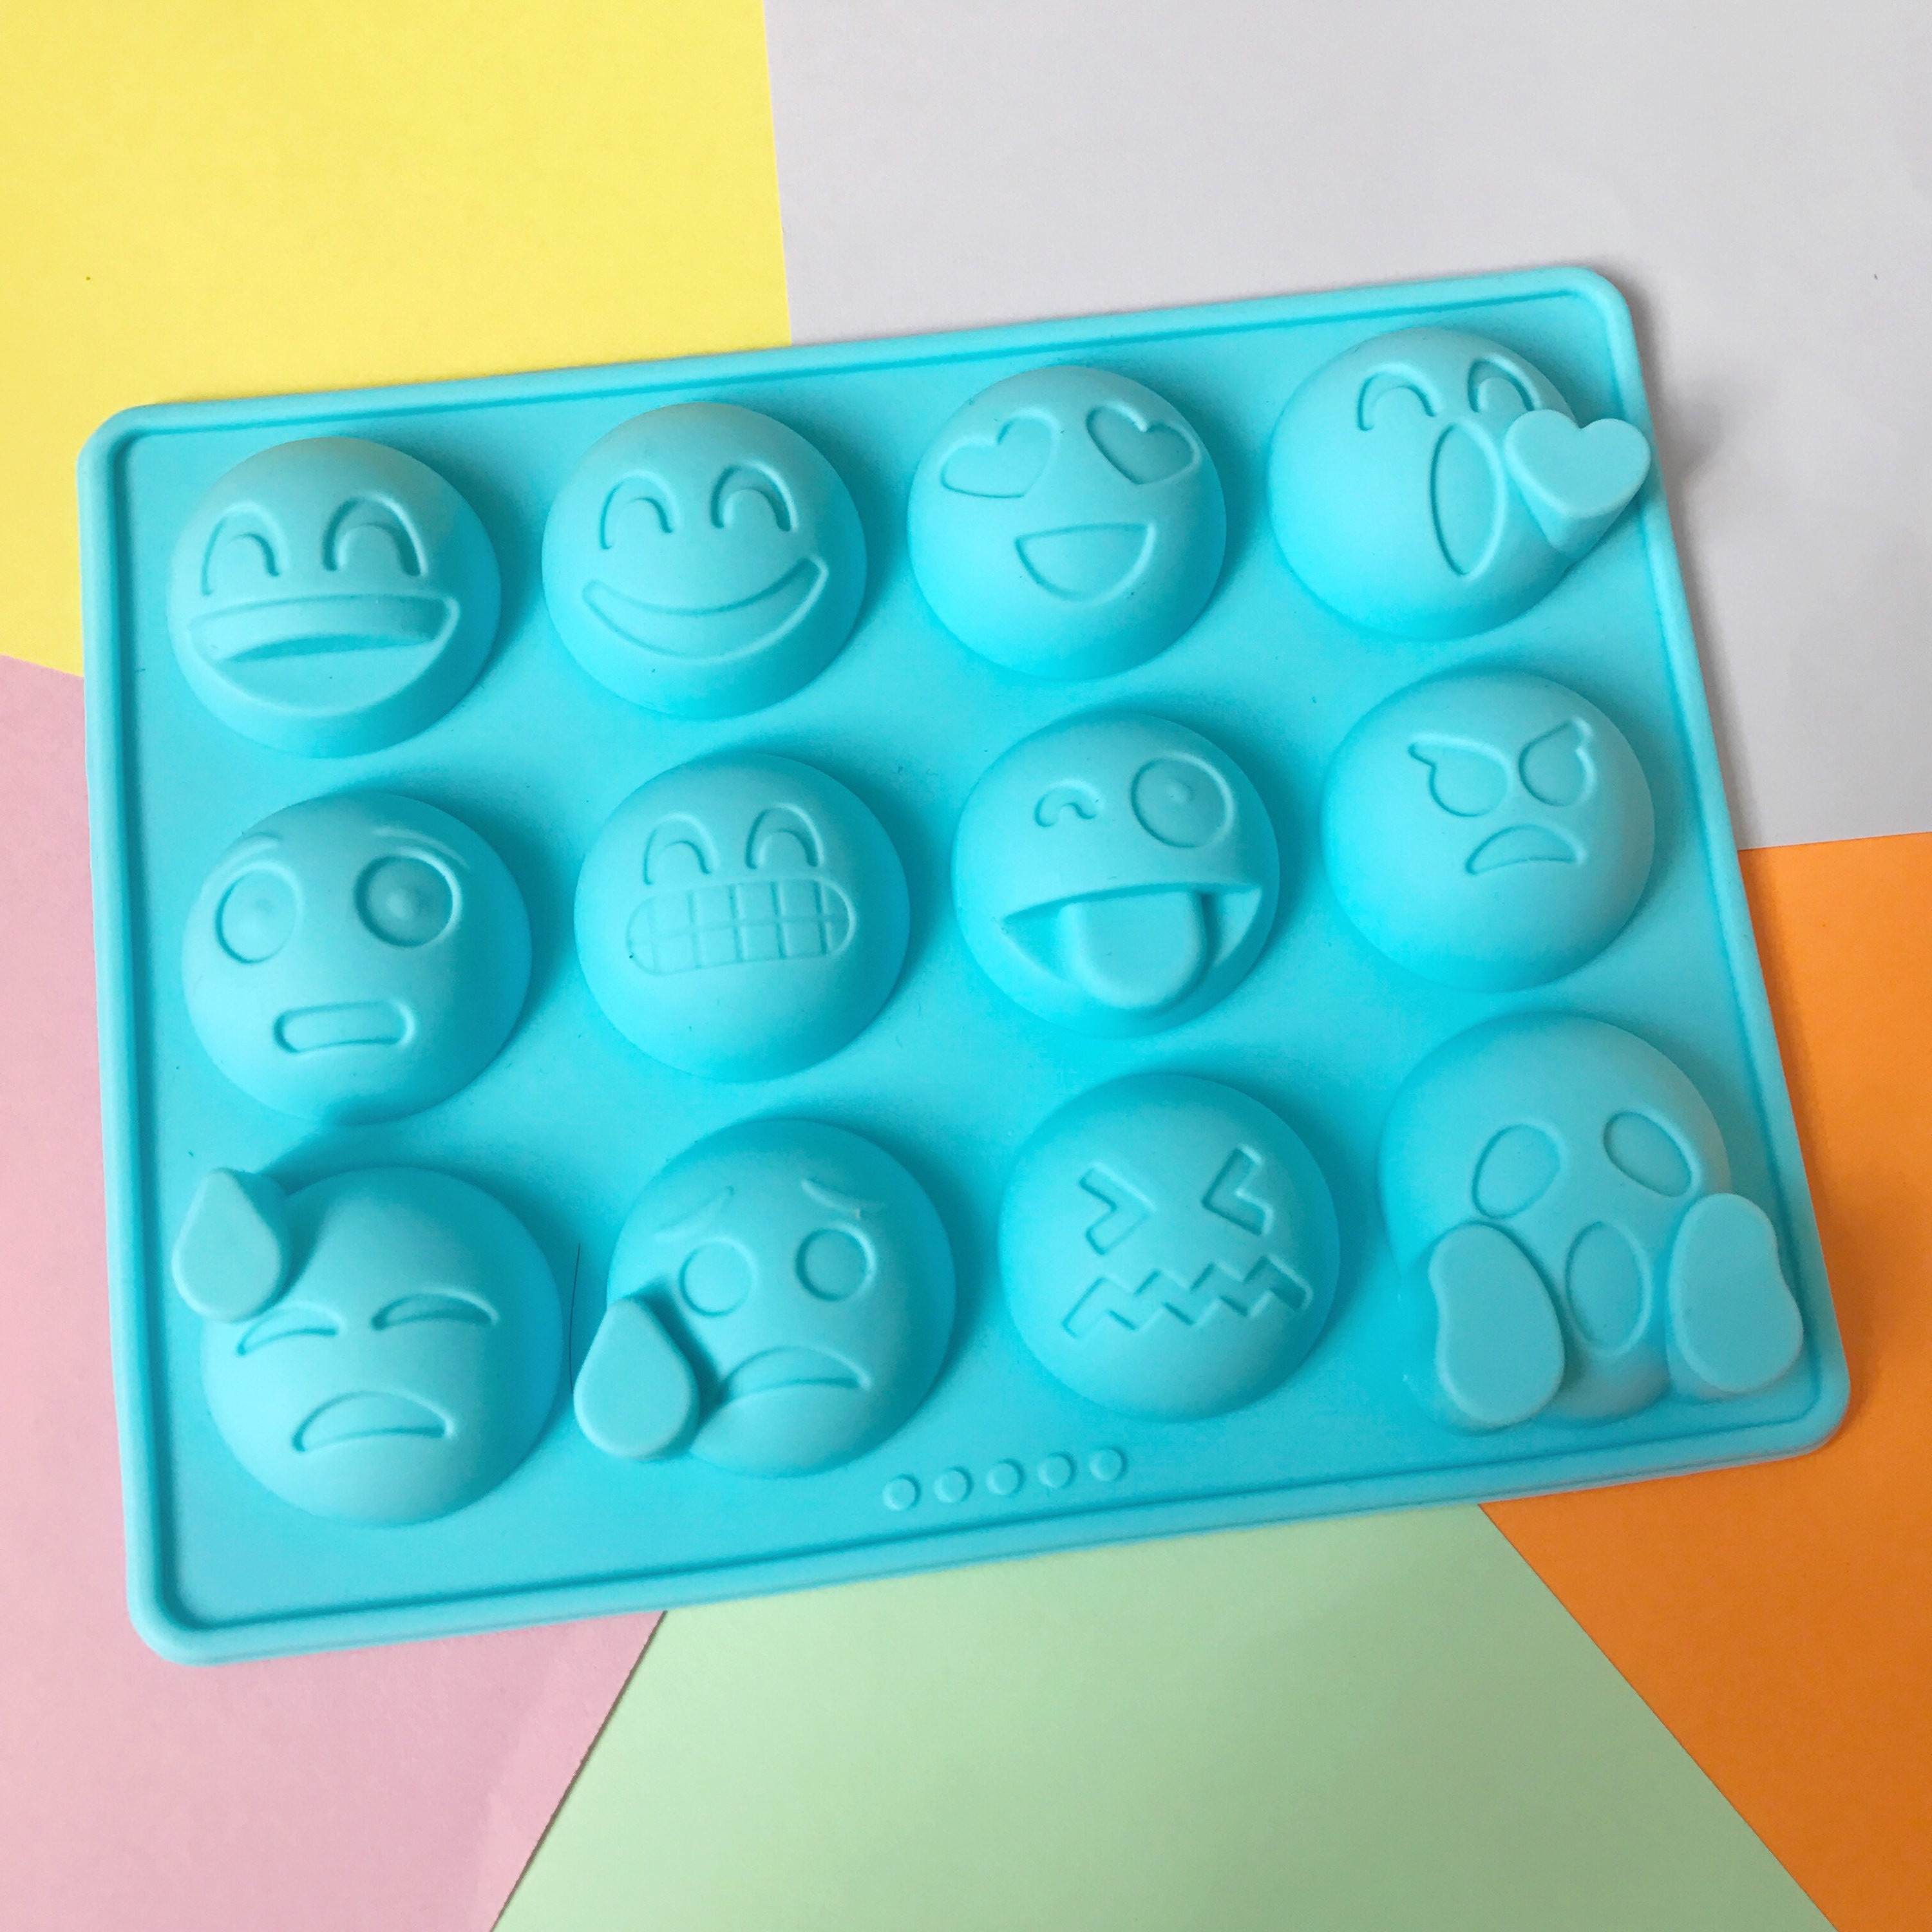 Buy KITCHENATICS Nonstick BPA-free Small Silicone Molds for Candy, Emoji  Molds Silicone for Mini Candy Molds, Jello, Gummy Candy, Silicone Baking  Molds for Kids Adults, Smiley Face Mold Silicone Set, 4 Pc